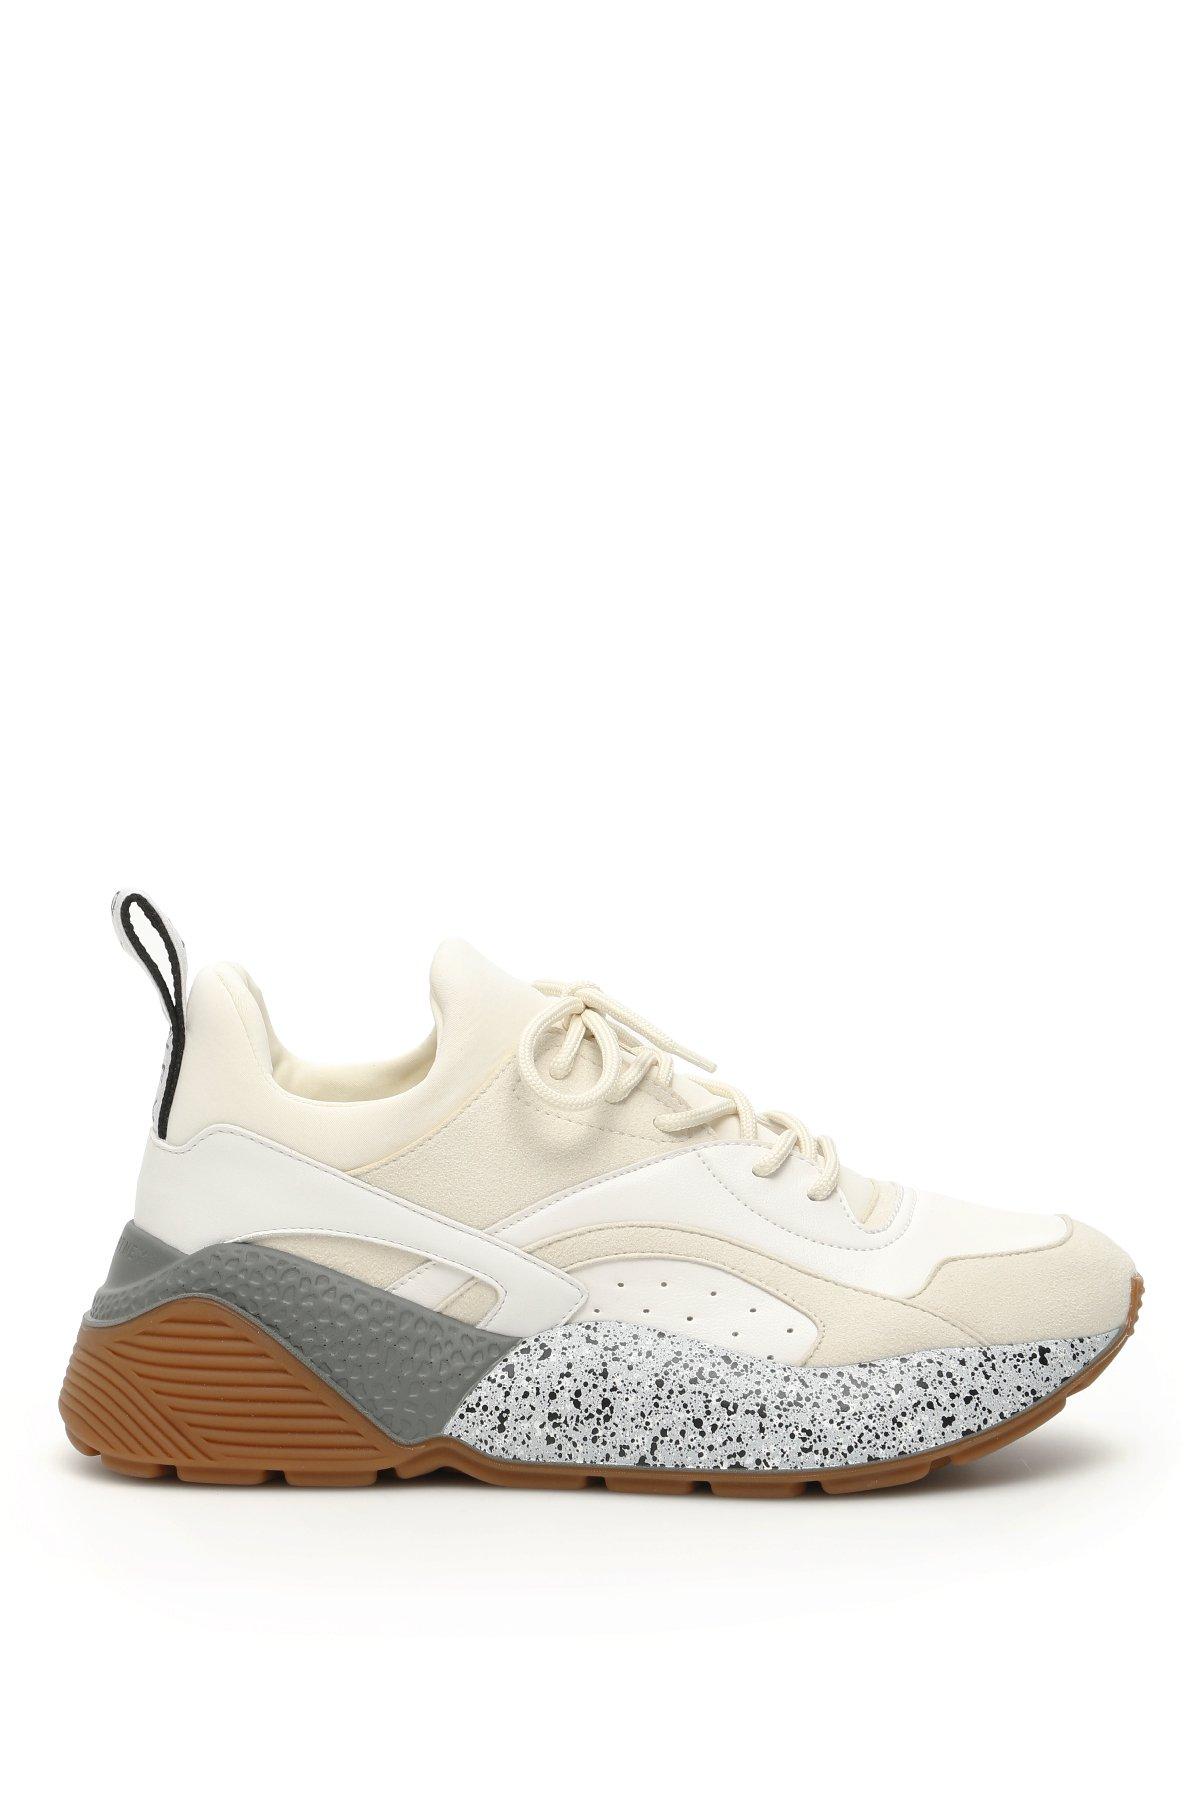 Stella McCartney Leather Eclypse Sneakers in White - Save 45% - Lyst